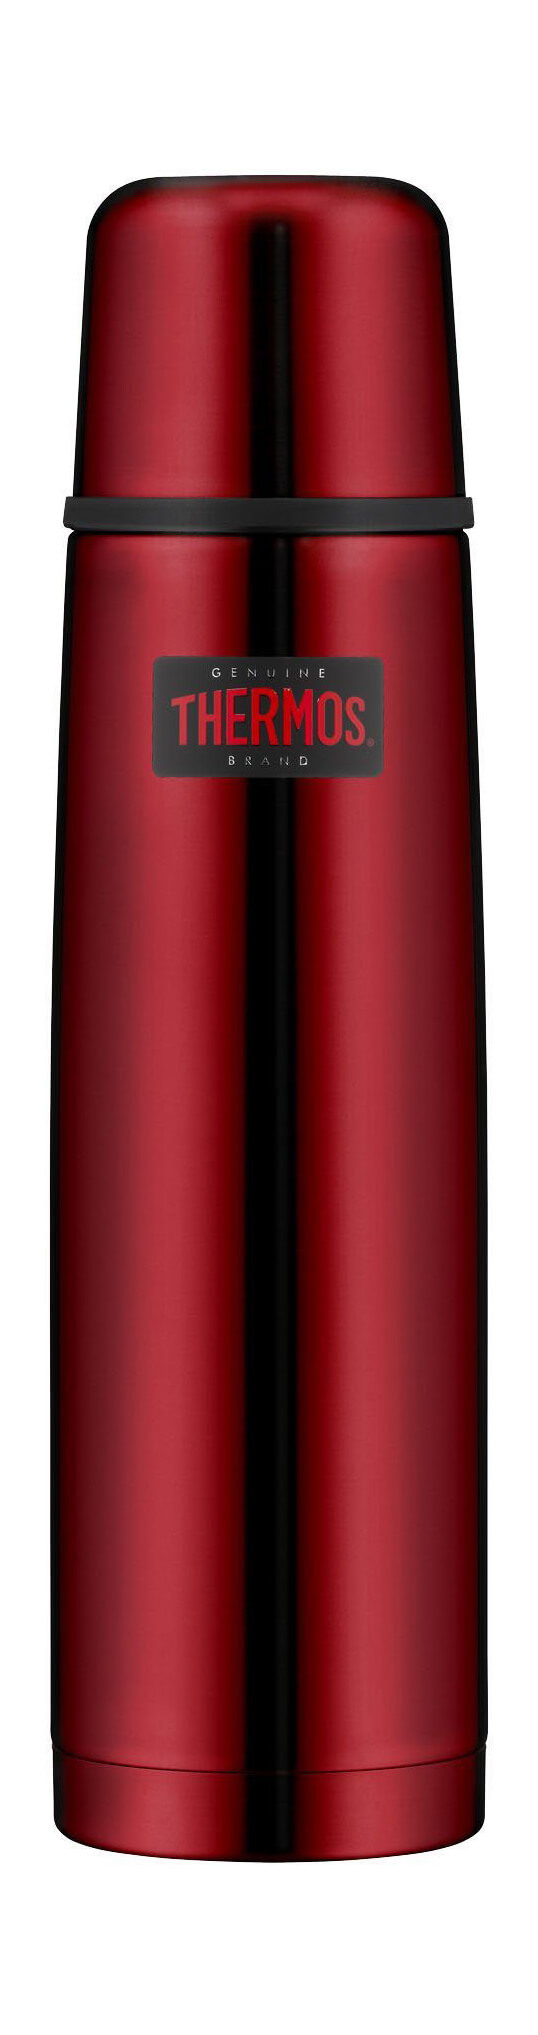 Thermos Isolierflasche Light & Compact